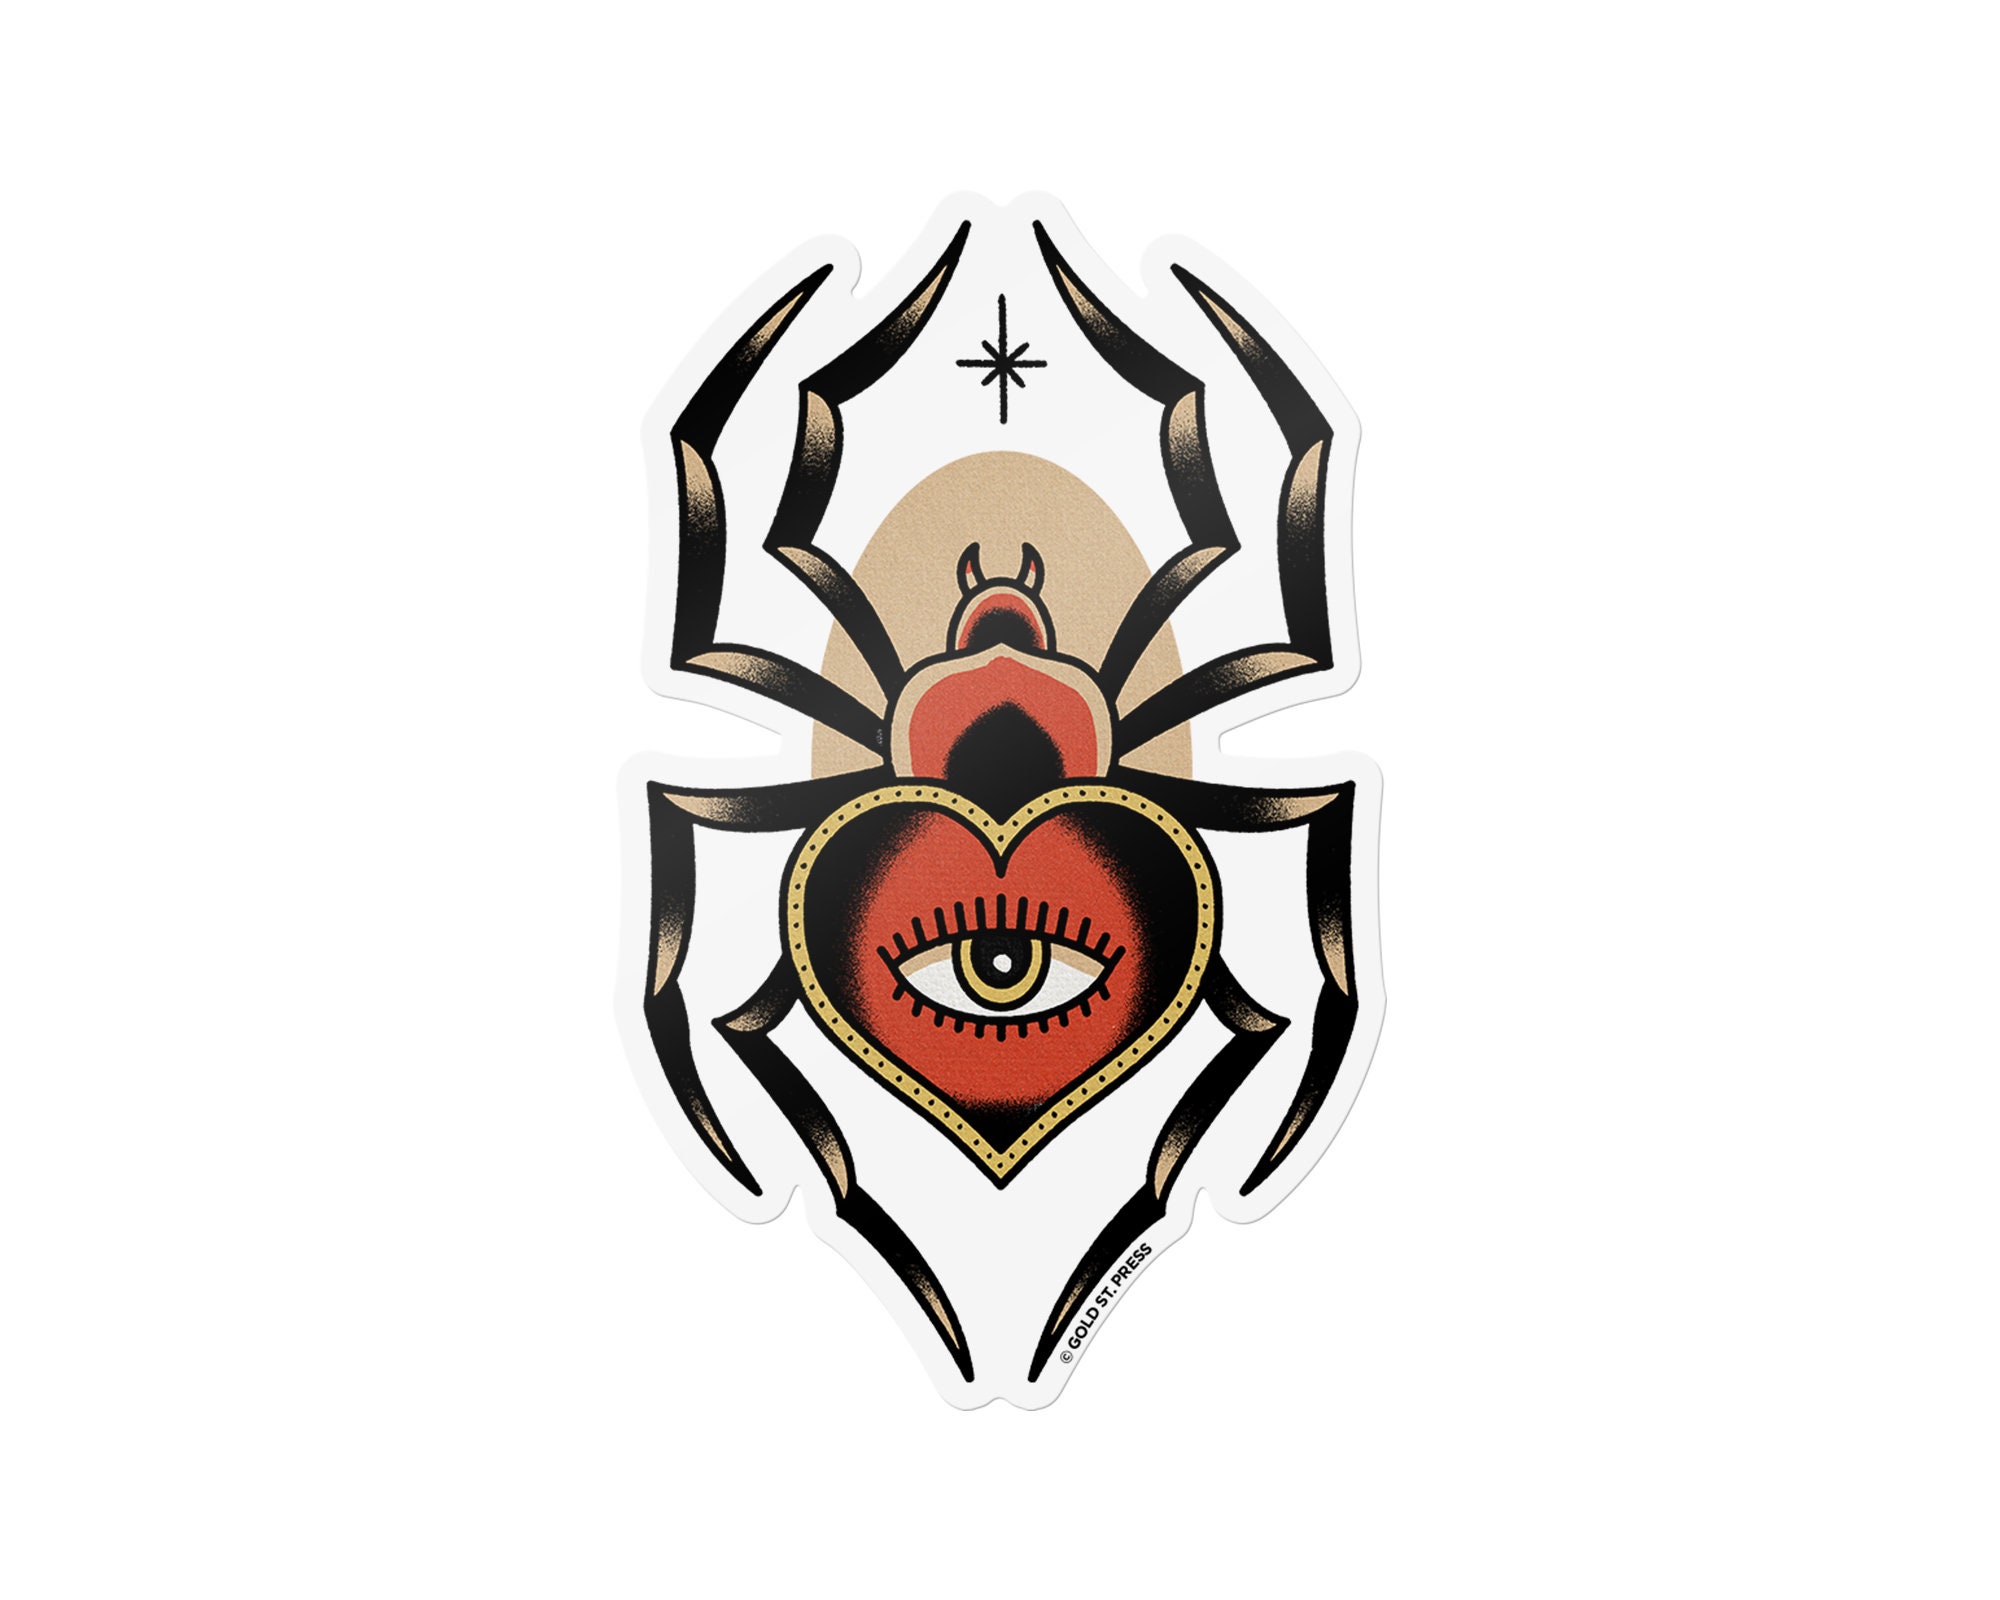 23 Coolest Spider Tattoo Designs For Men with Meaning